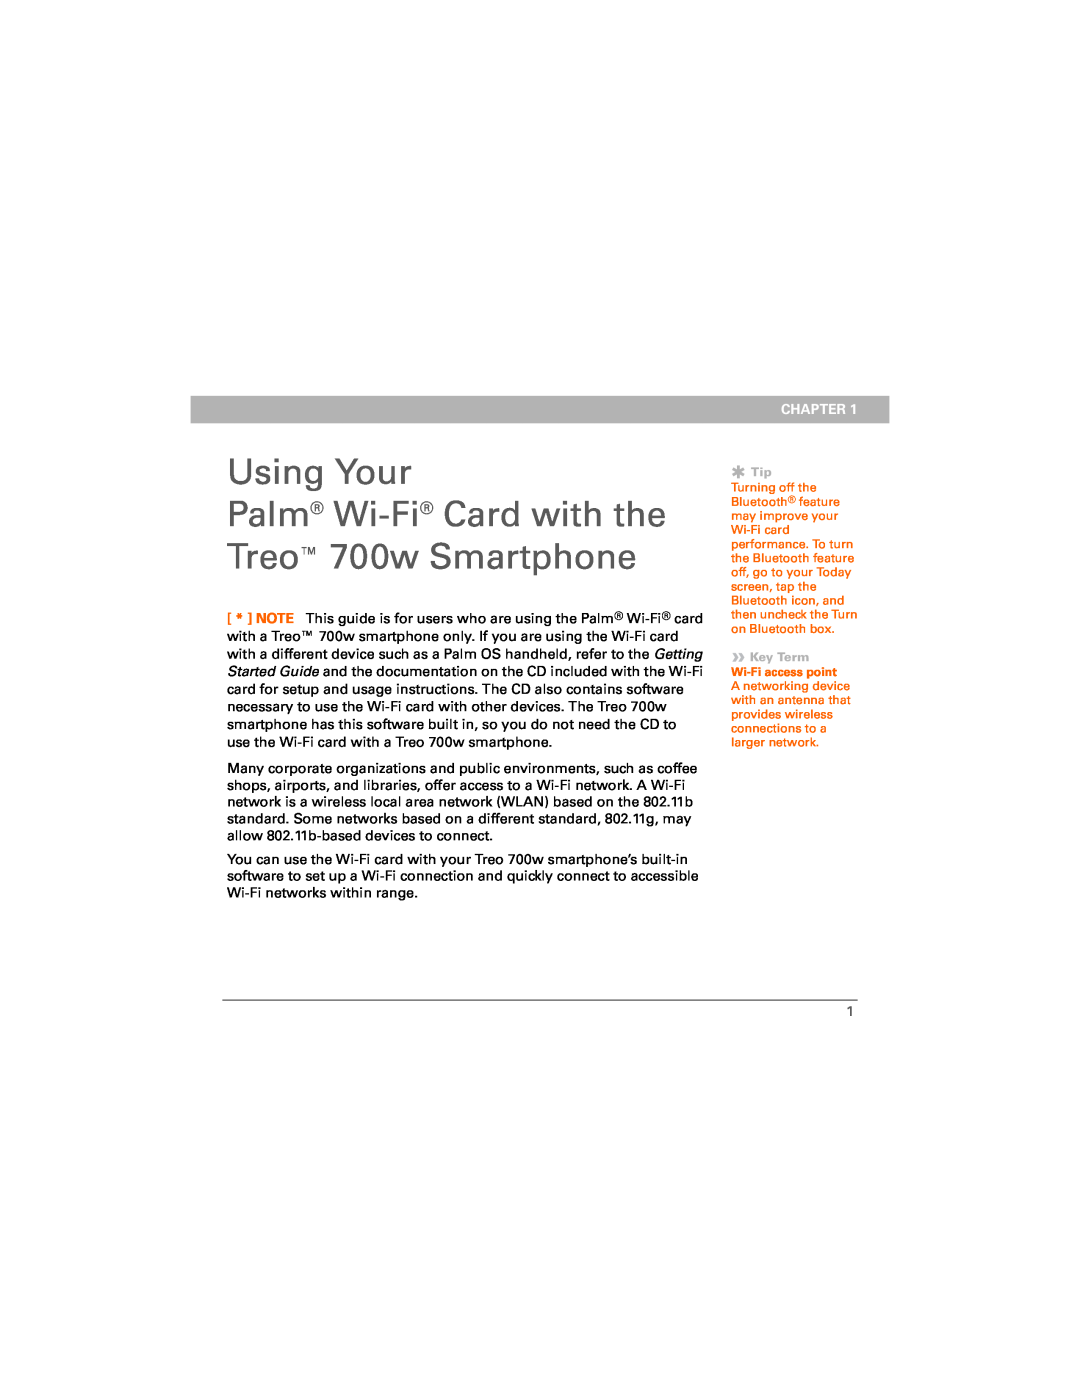 Palm manual Using Your Palm Wi-Fi Card with the Treo 700w Smartphone, Chapter 